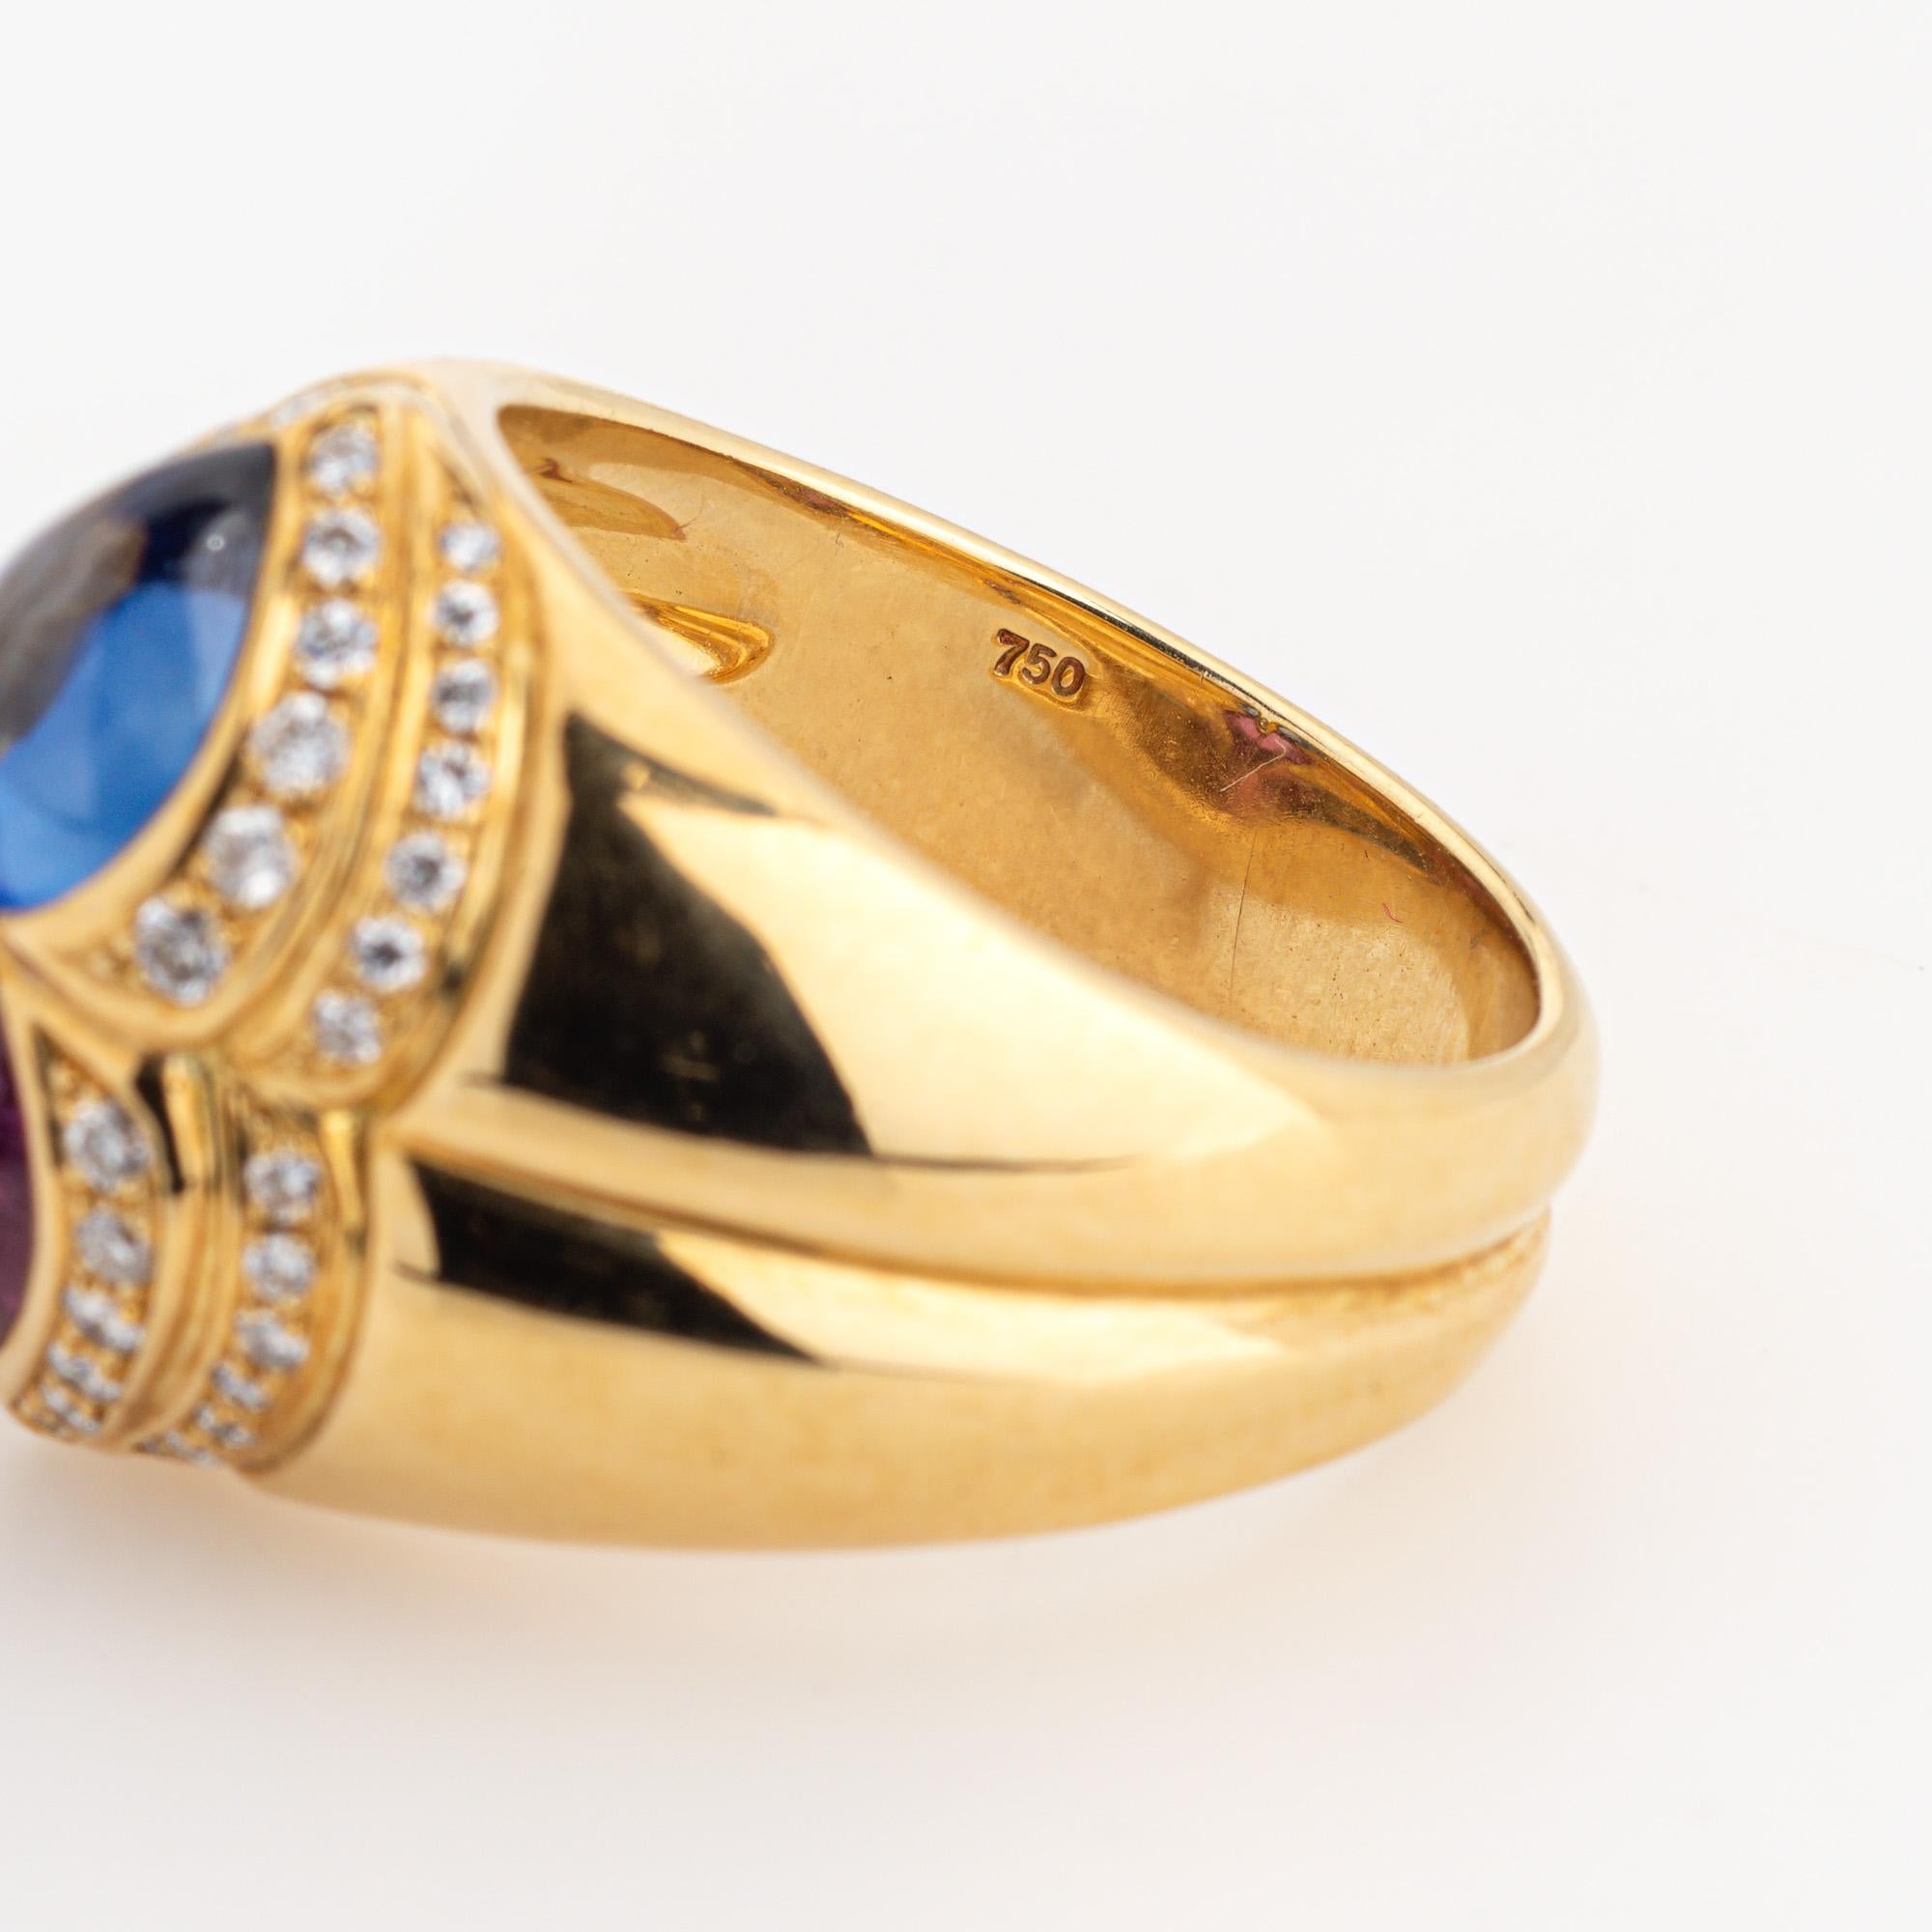 Chopard Pink Blue Sapphire Ring Diamond Estate 18k Yellow Gold Sz 6 Band Signed For Sale 1